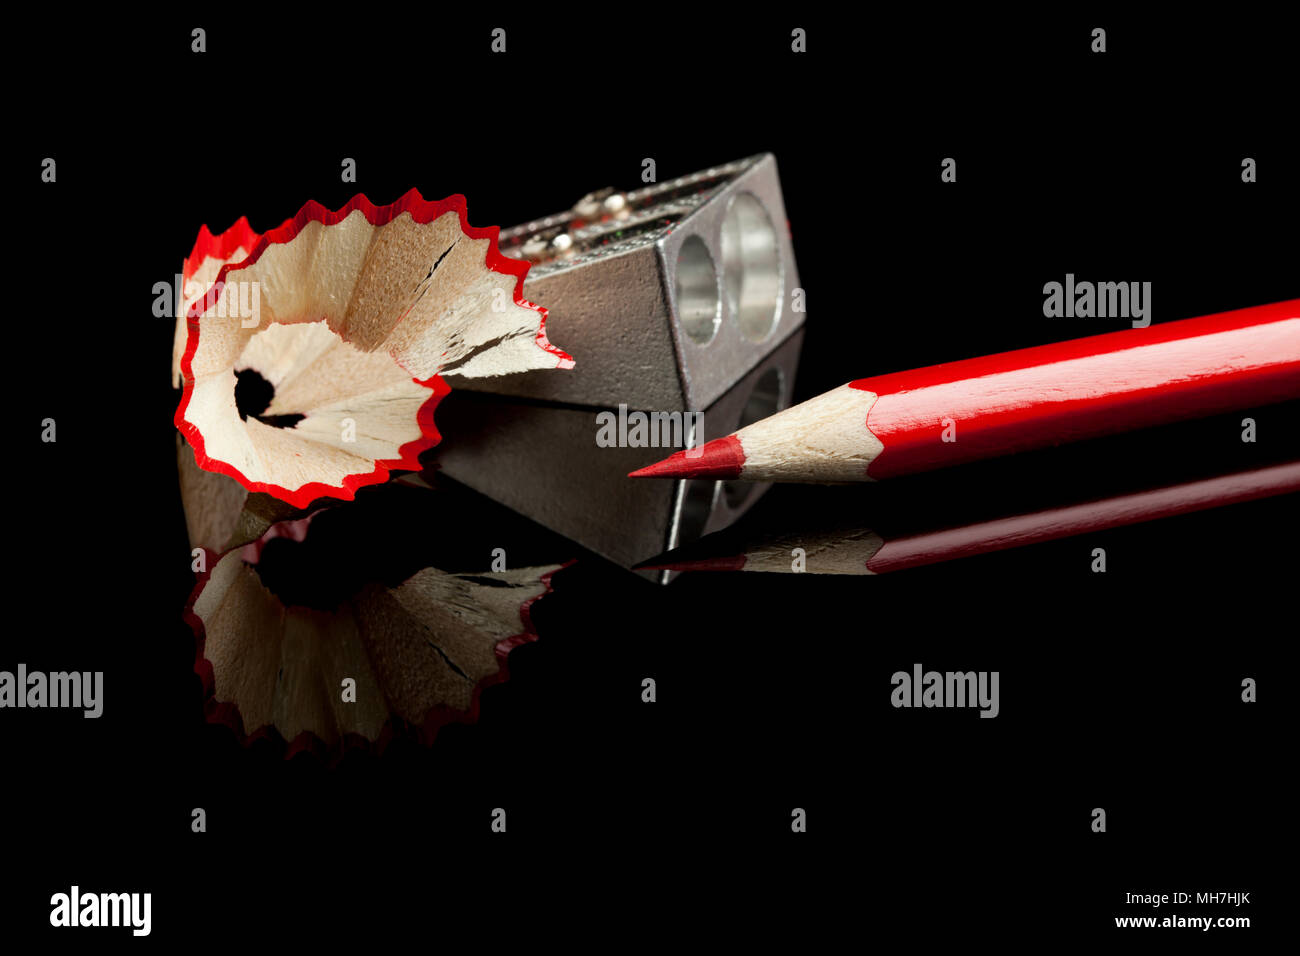 sharpened red pencil  with sharpener and shavings on reflective black surface Stock Photo